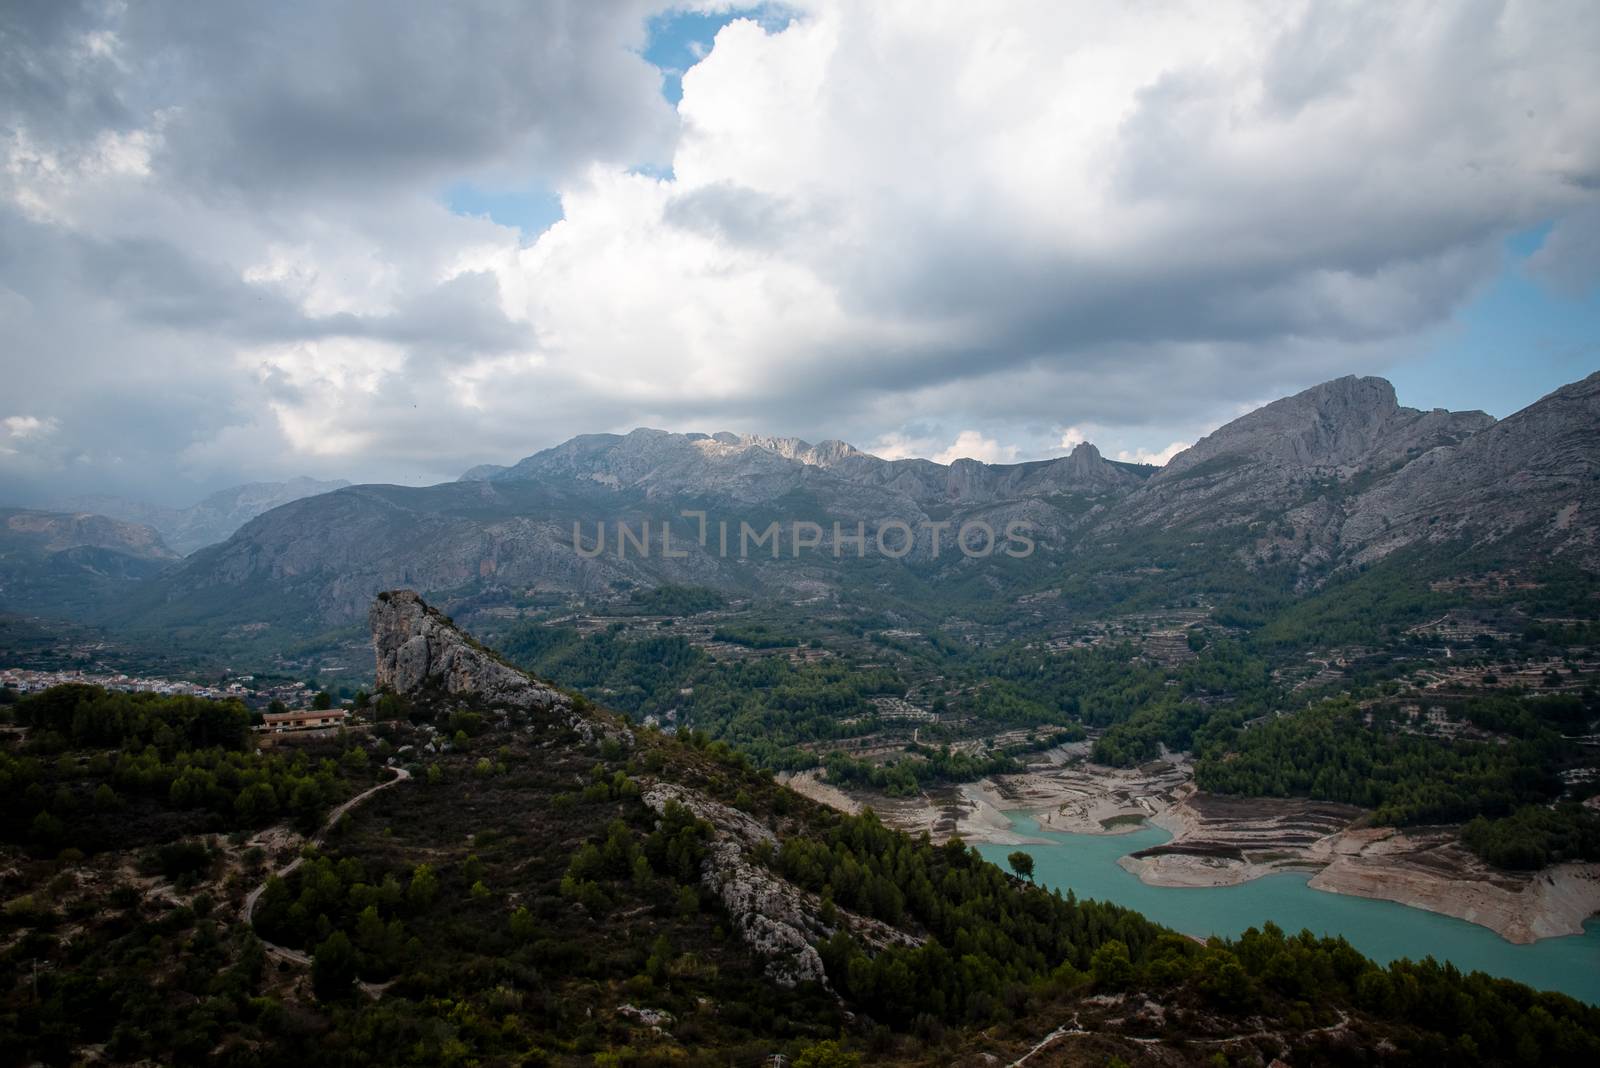 See amazing views from Guadalest’s castle which sits perched on the top of the mountain.